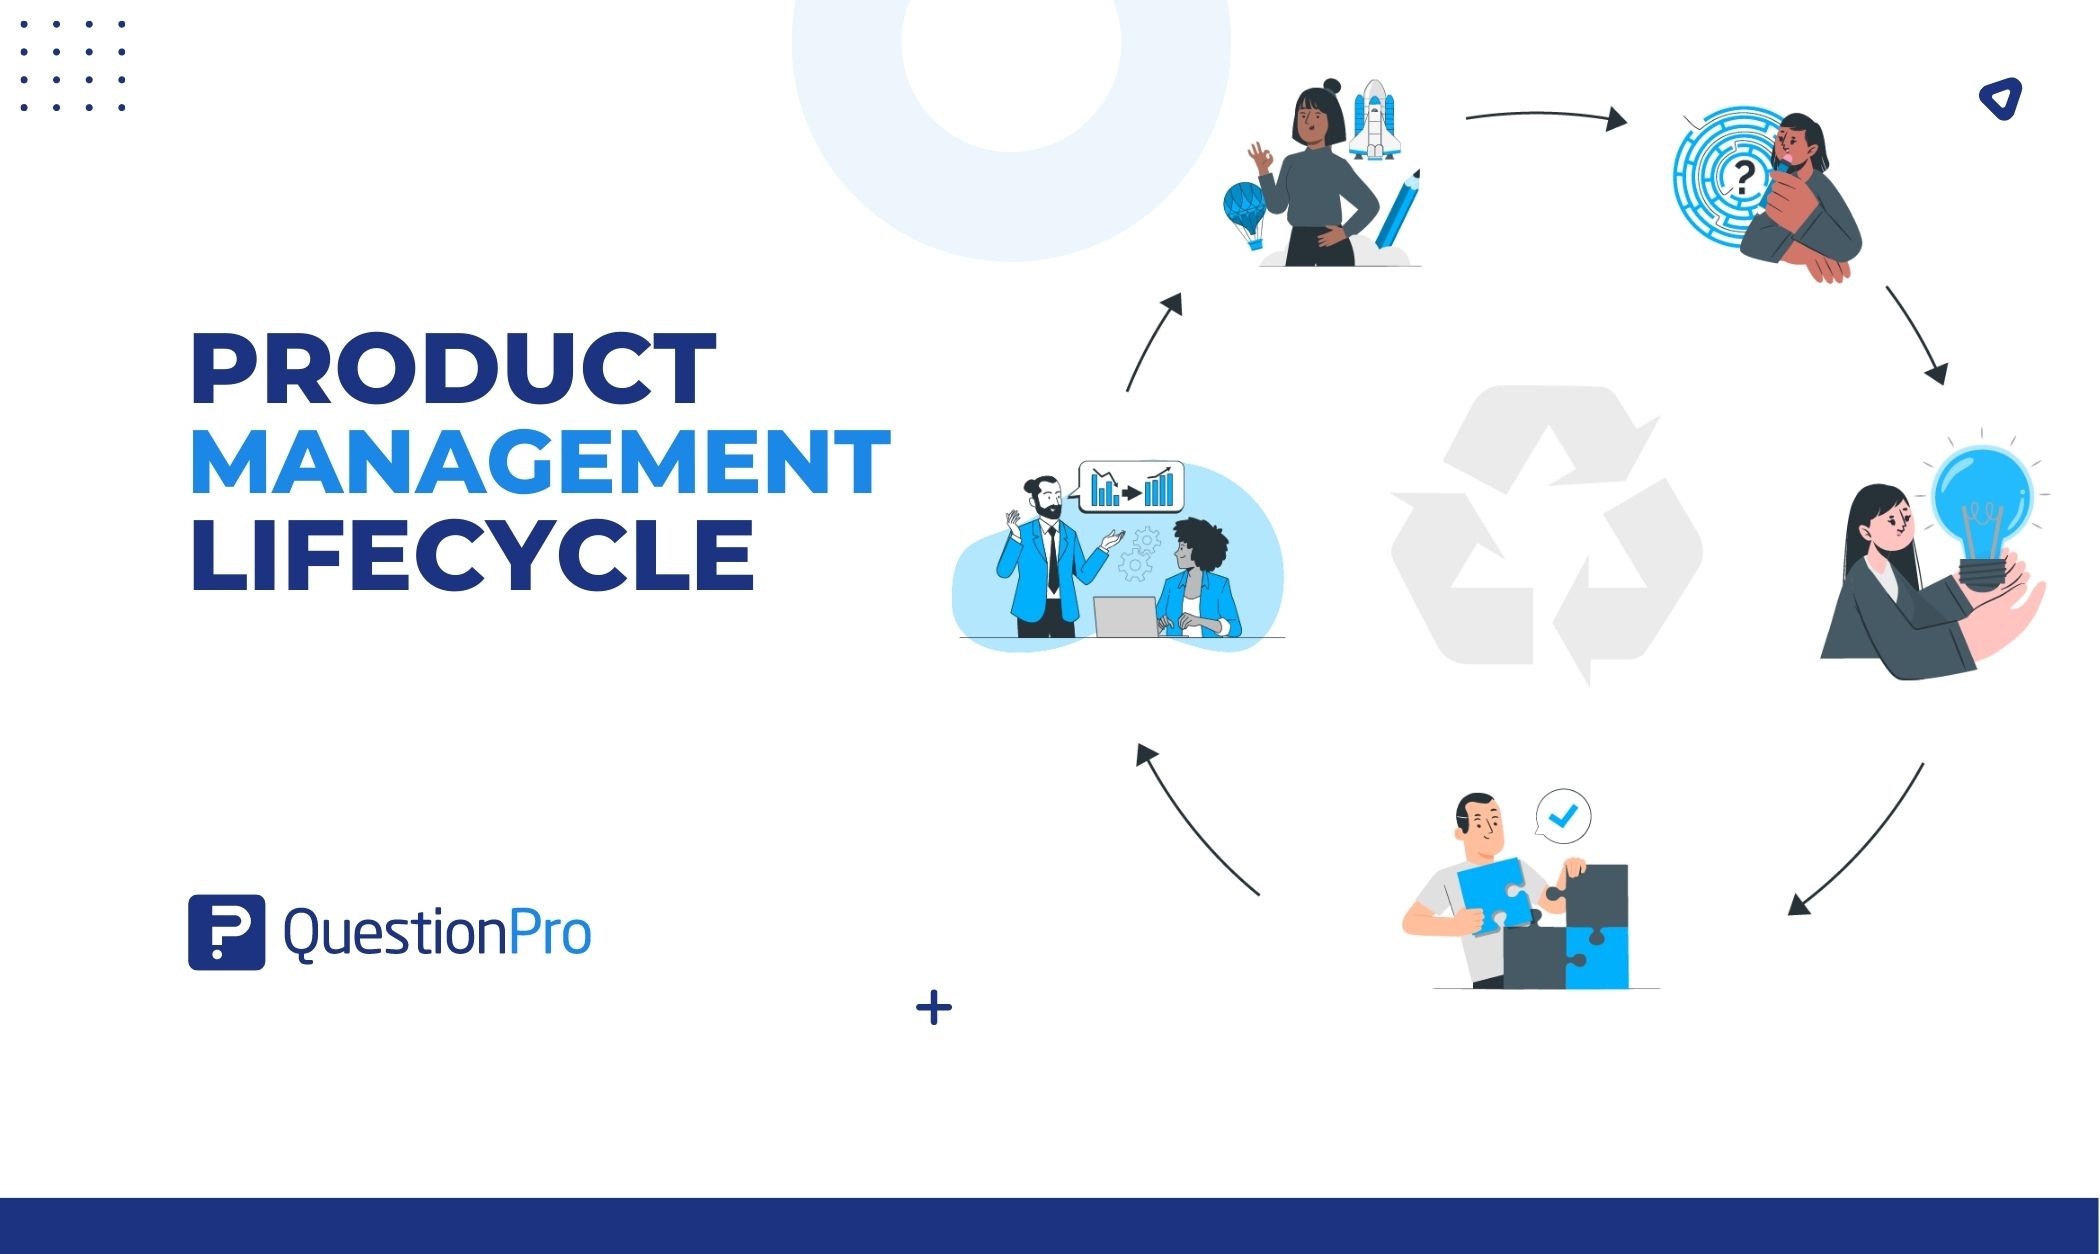 The Product Management Lifecycle shows how businesses create, launch, and manage products. Use it to boost product development and sales.